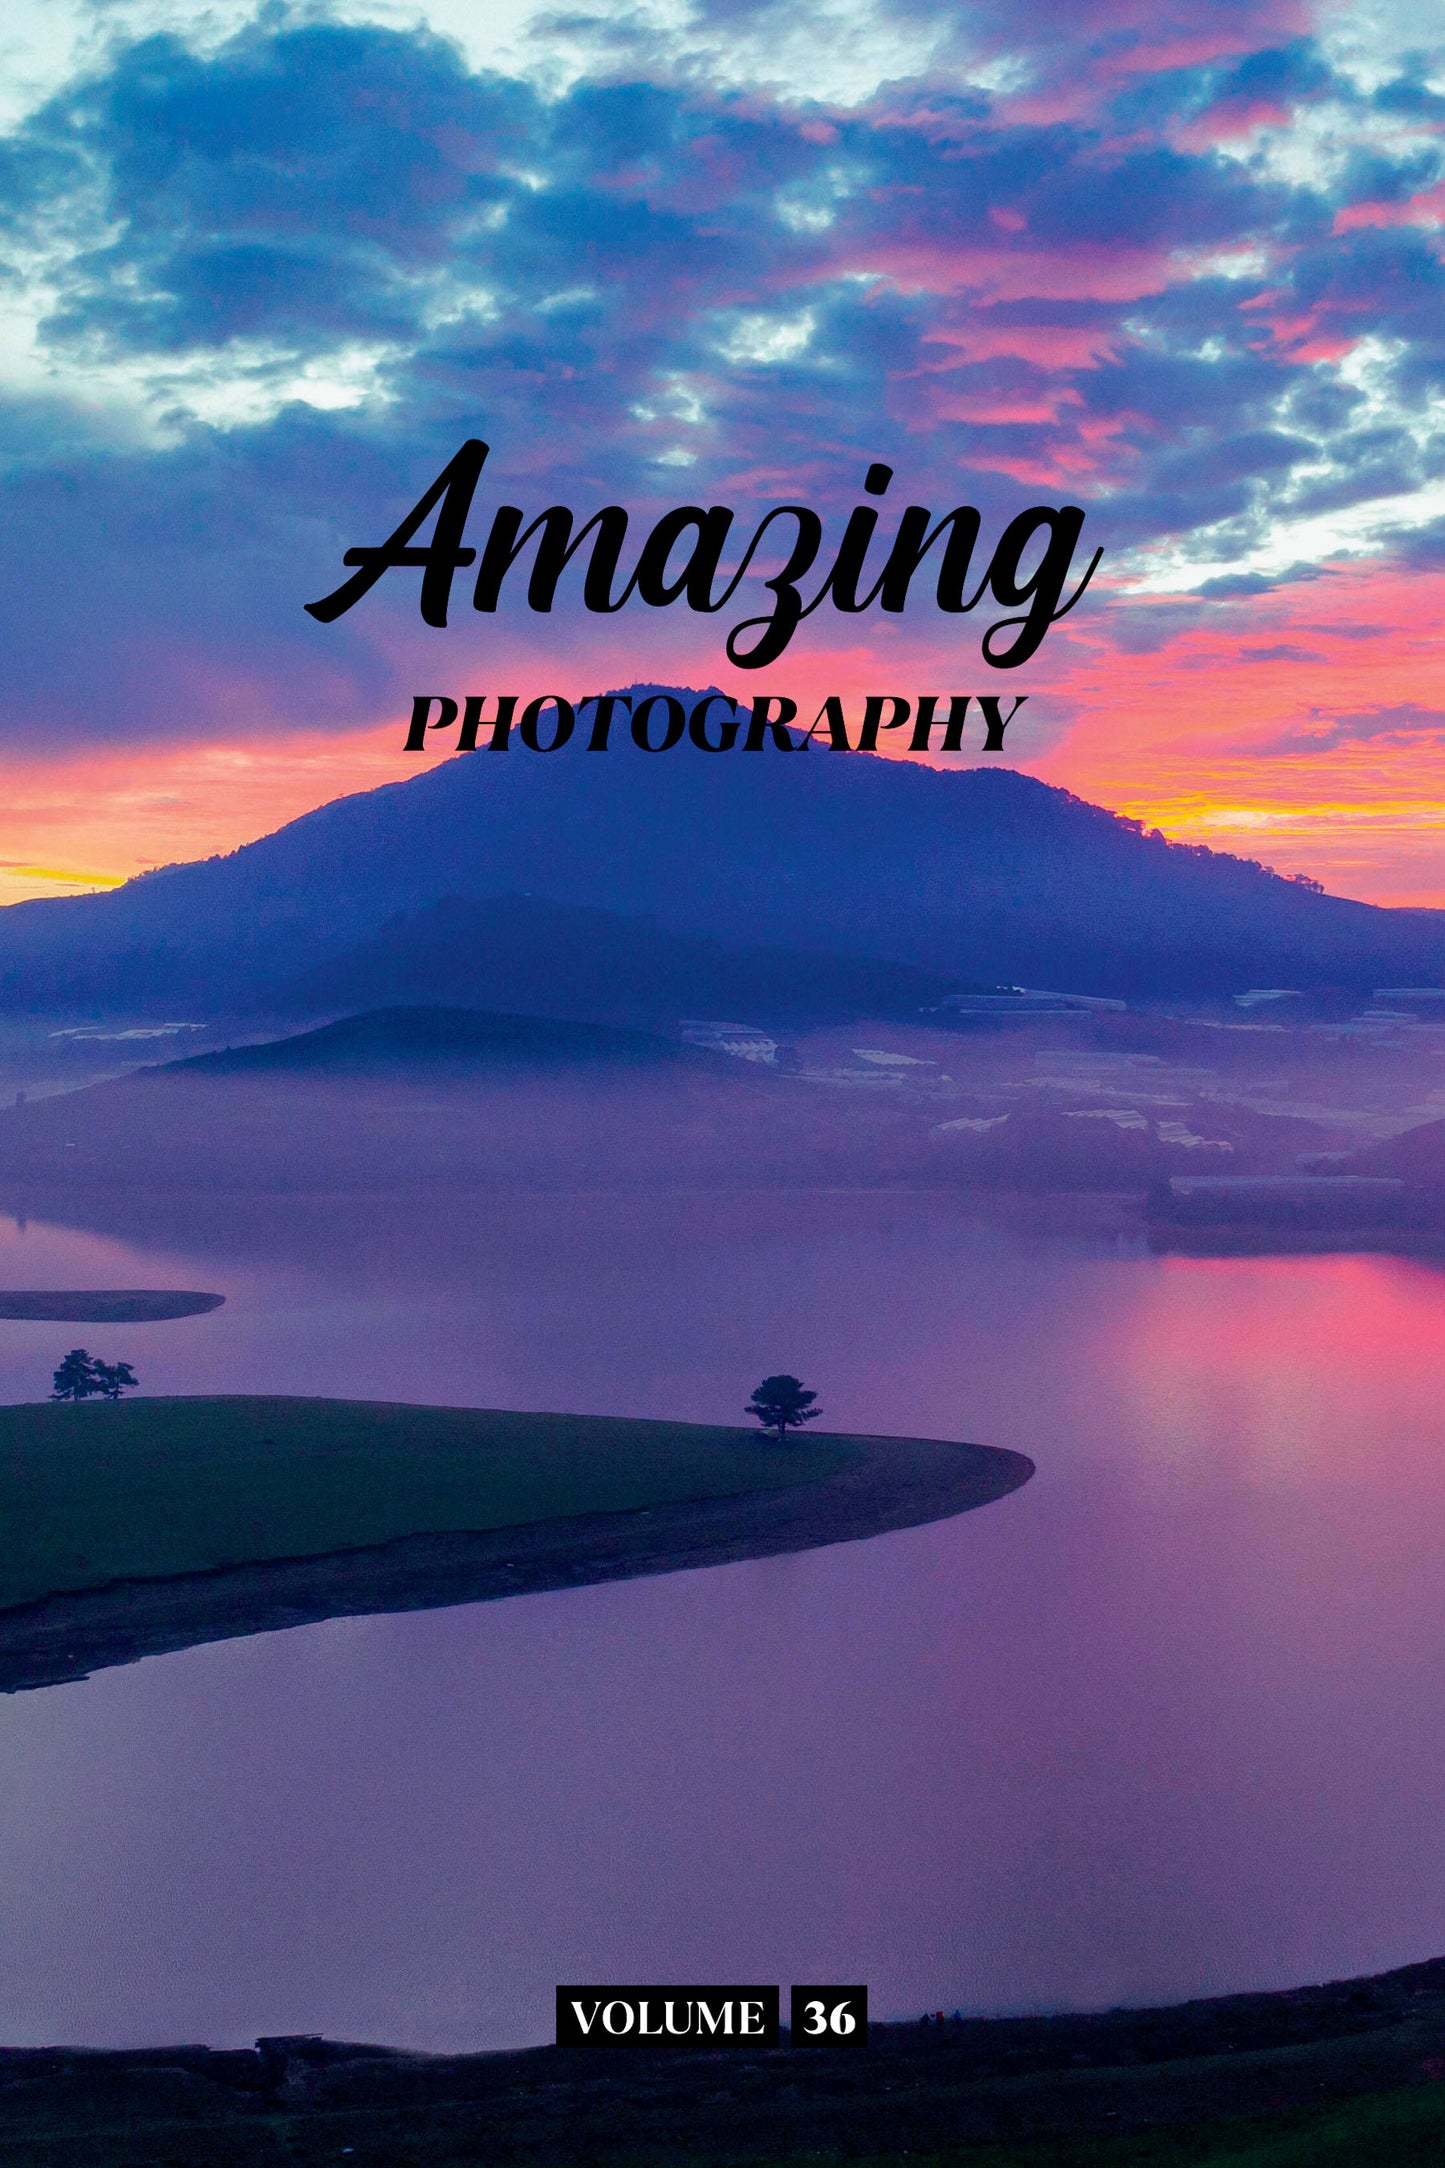 Amazing Photography Volume 36 (Physical Book Pre-Order)